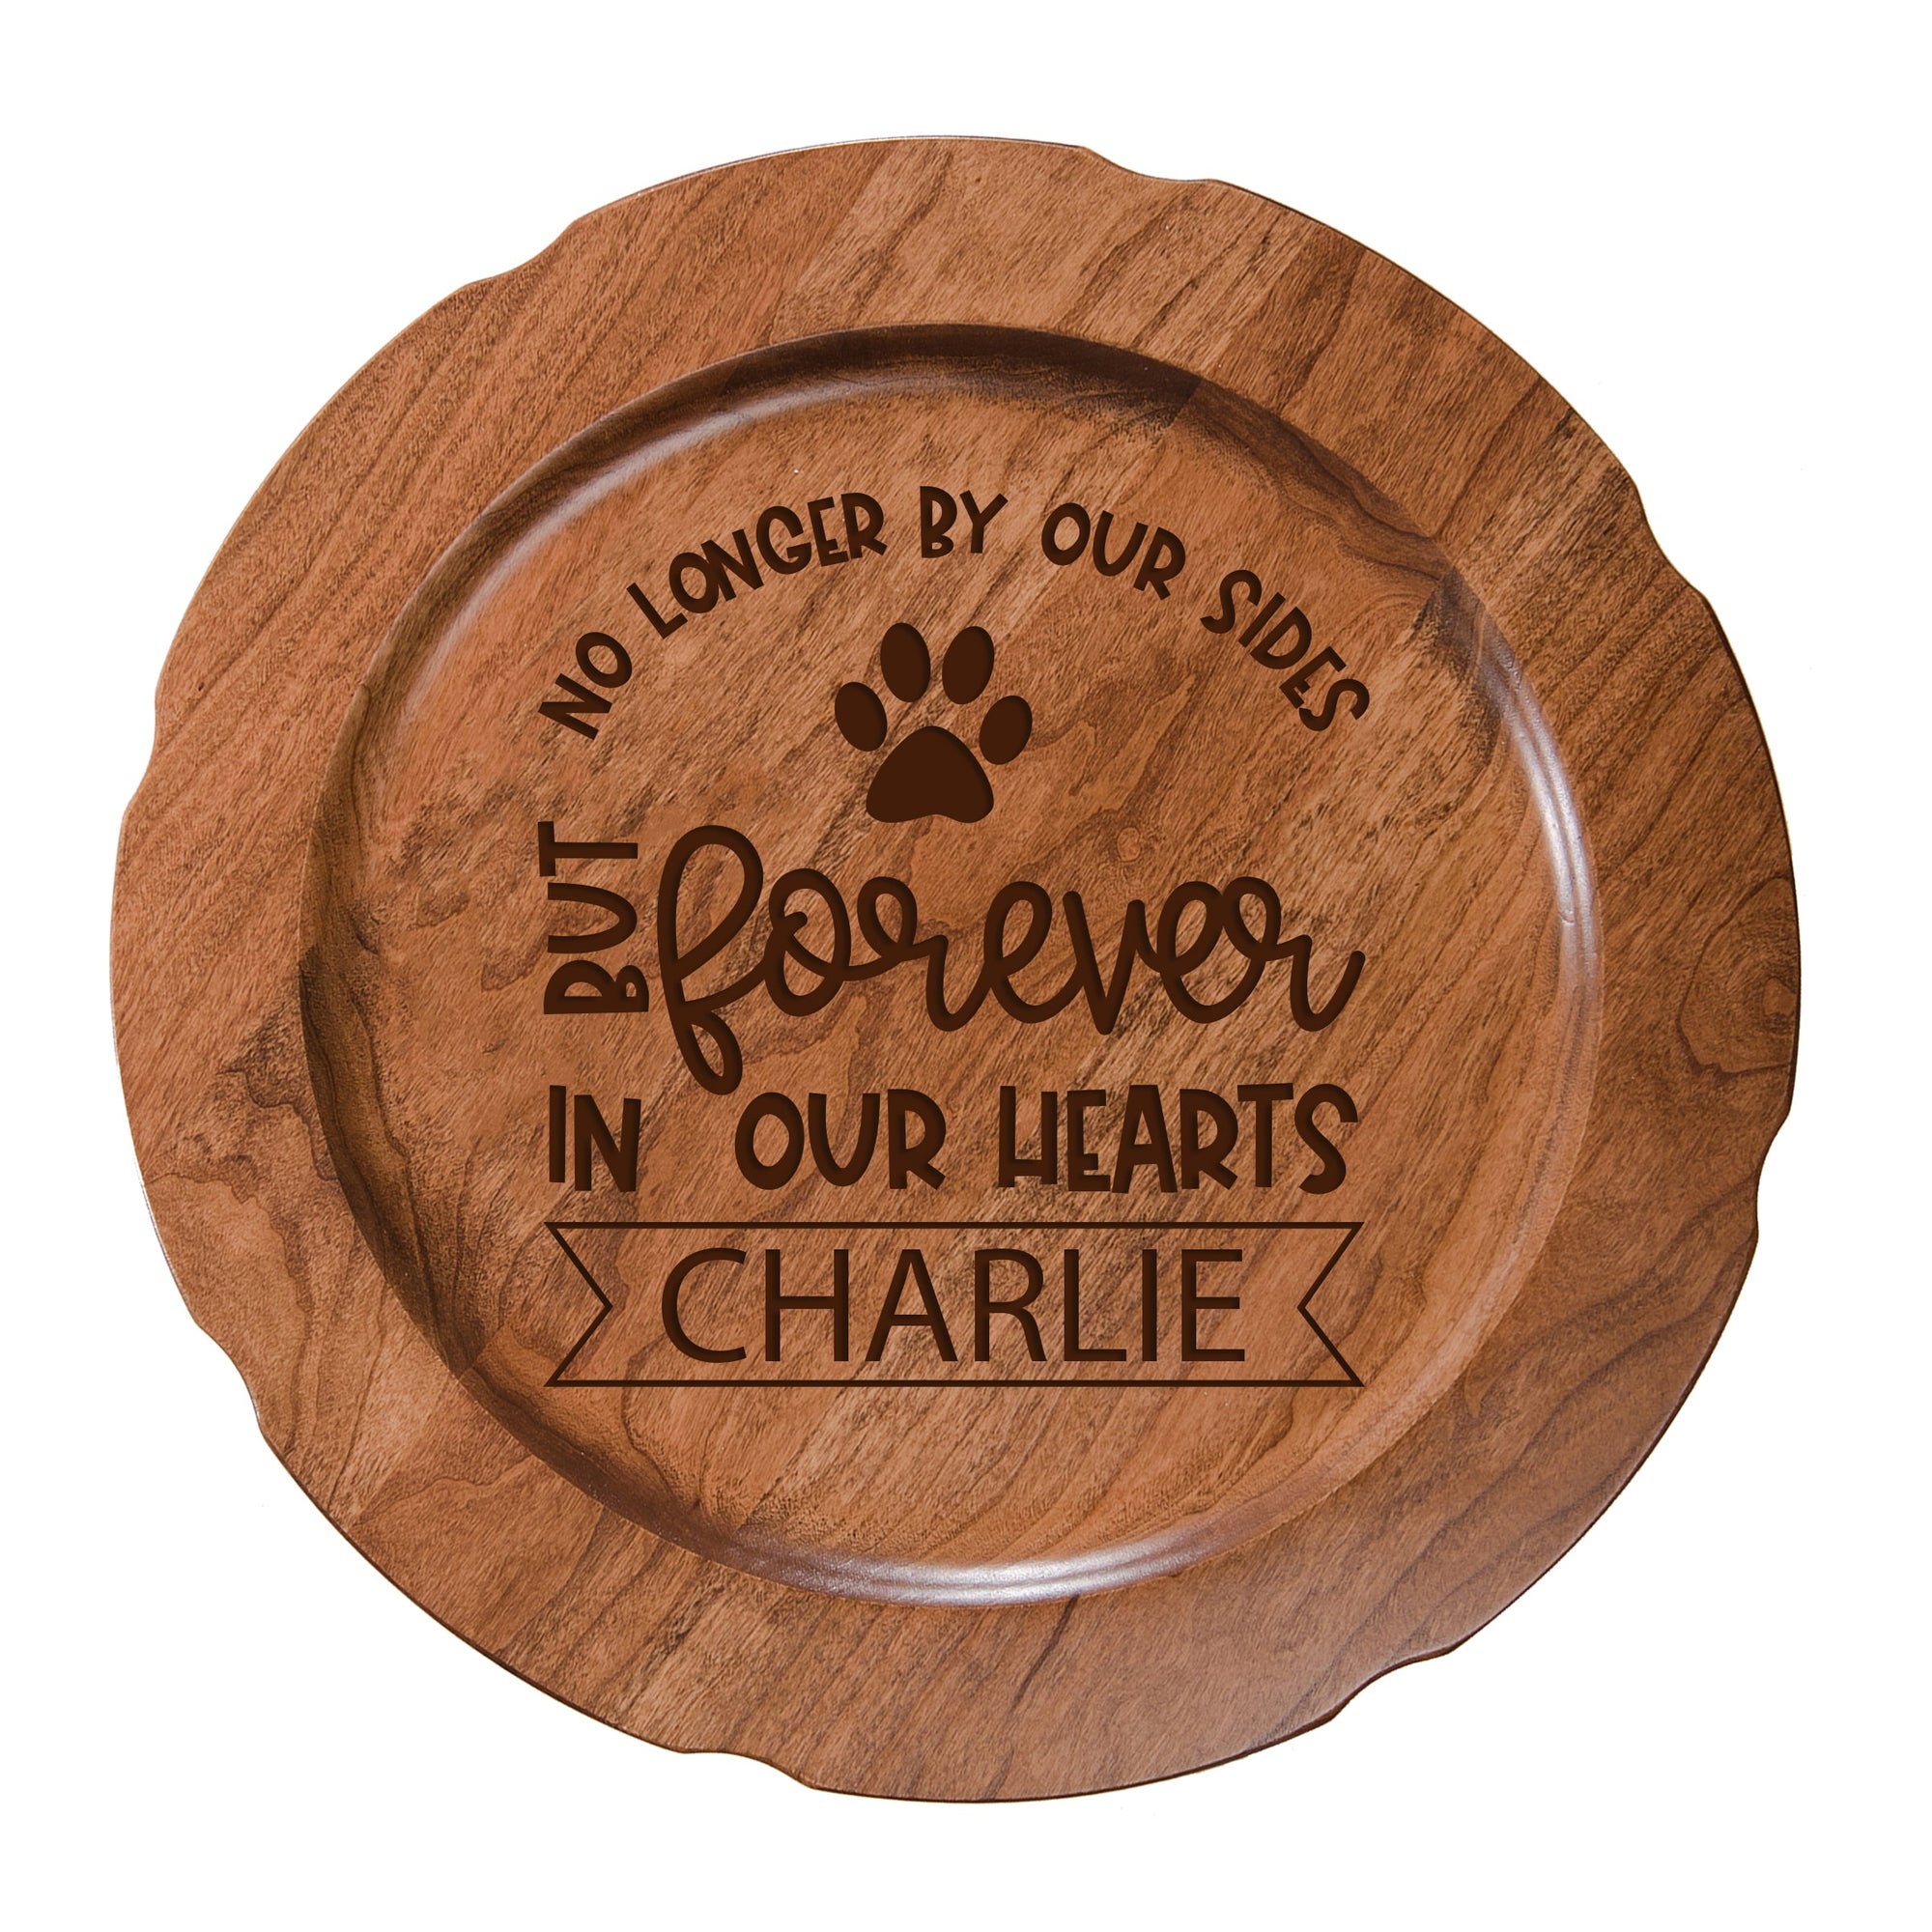 12" Cherry Pet Memorial Plate with phrase "No Longer By Our Side"